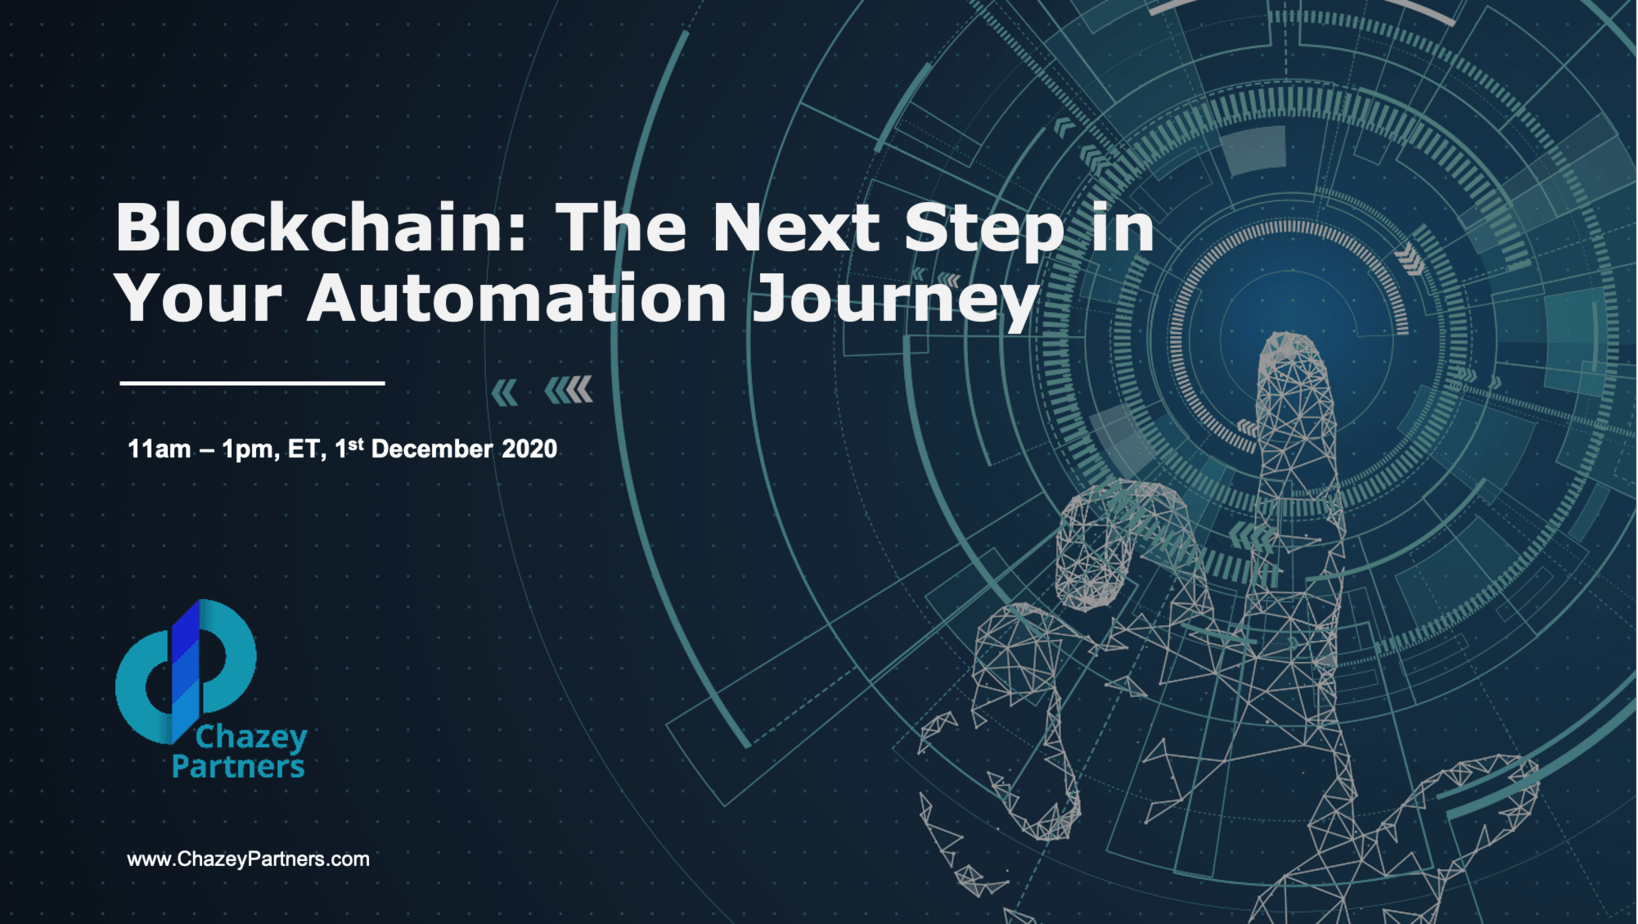 Blockchain: Next Step in Your Automation Journey